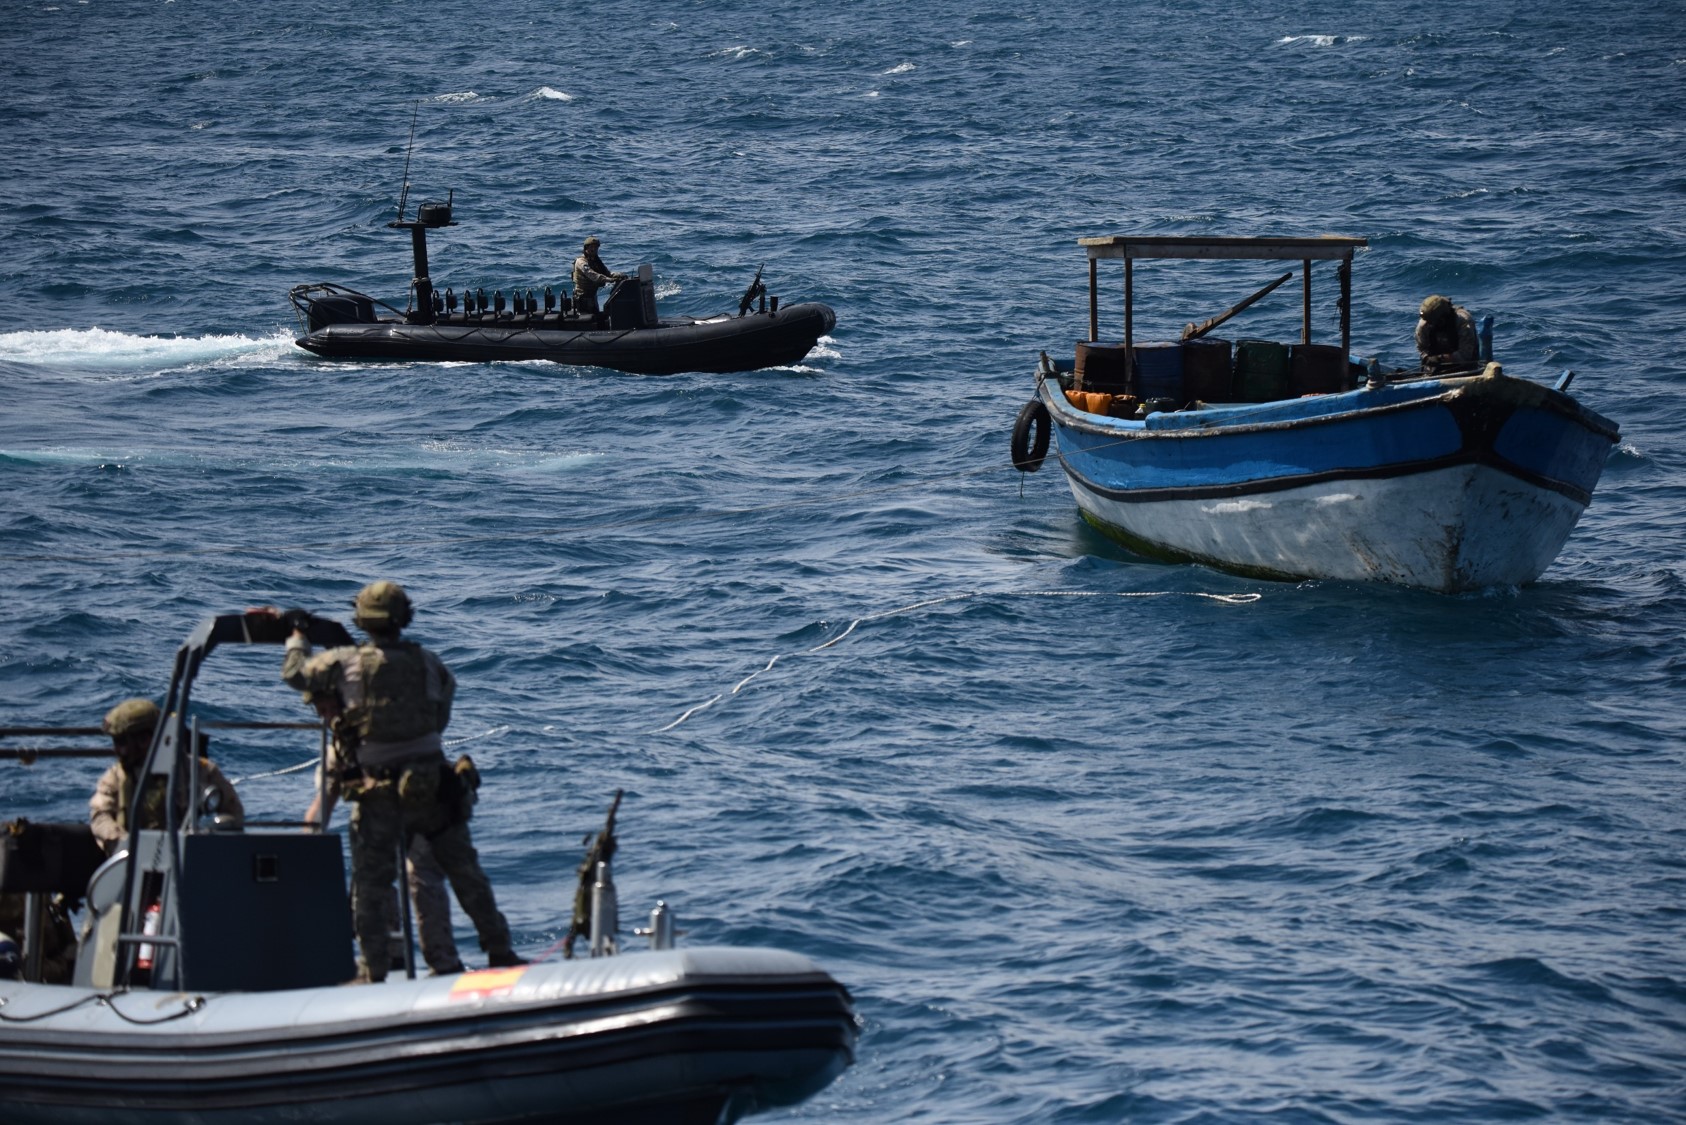 The 'Canarias' frigate rescues personnel from Somali Armed Forces in waters of the Indian Ocean